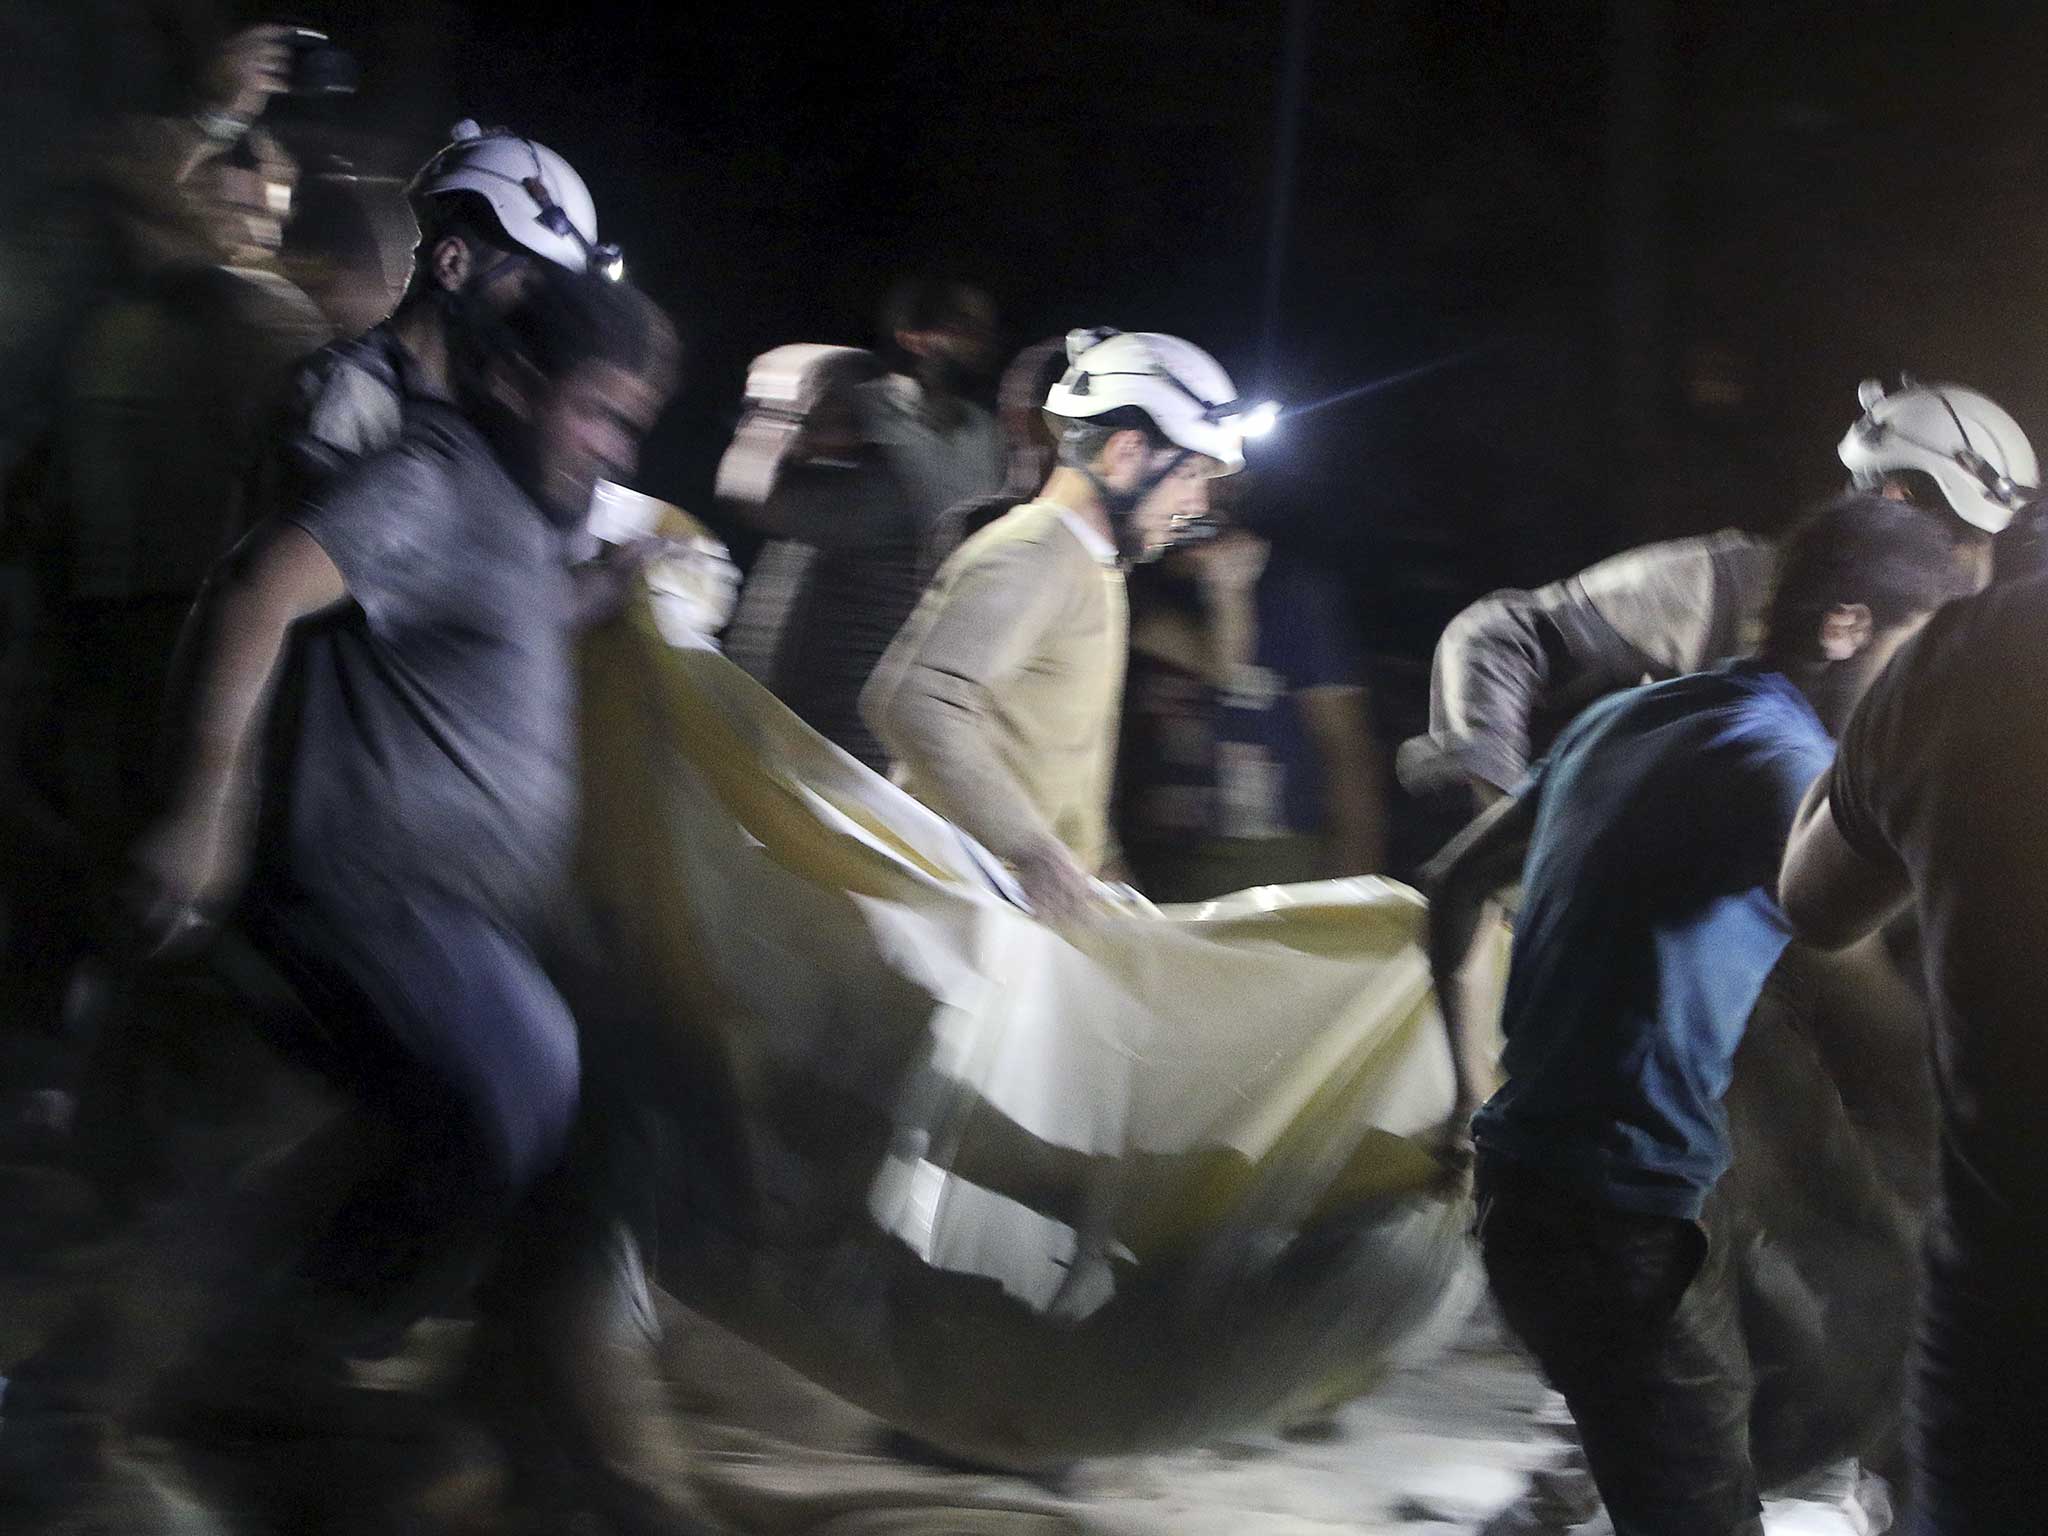 Civil defence members carry a casualty after an air strike at a field hospital in the rebel held area of al-Sukari district of Aleppo